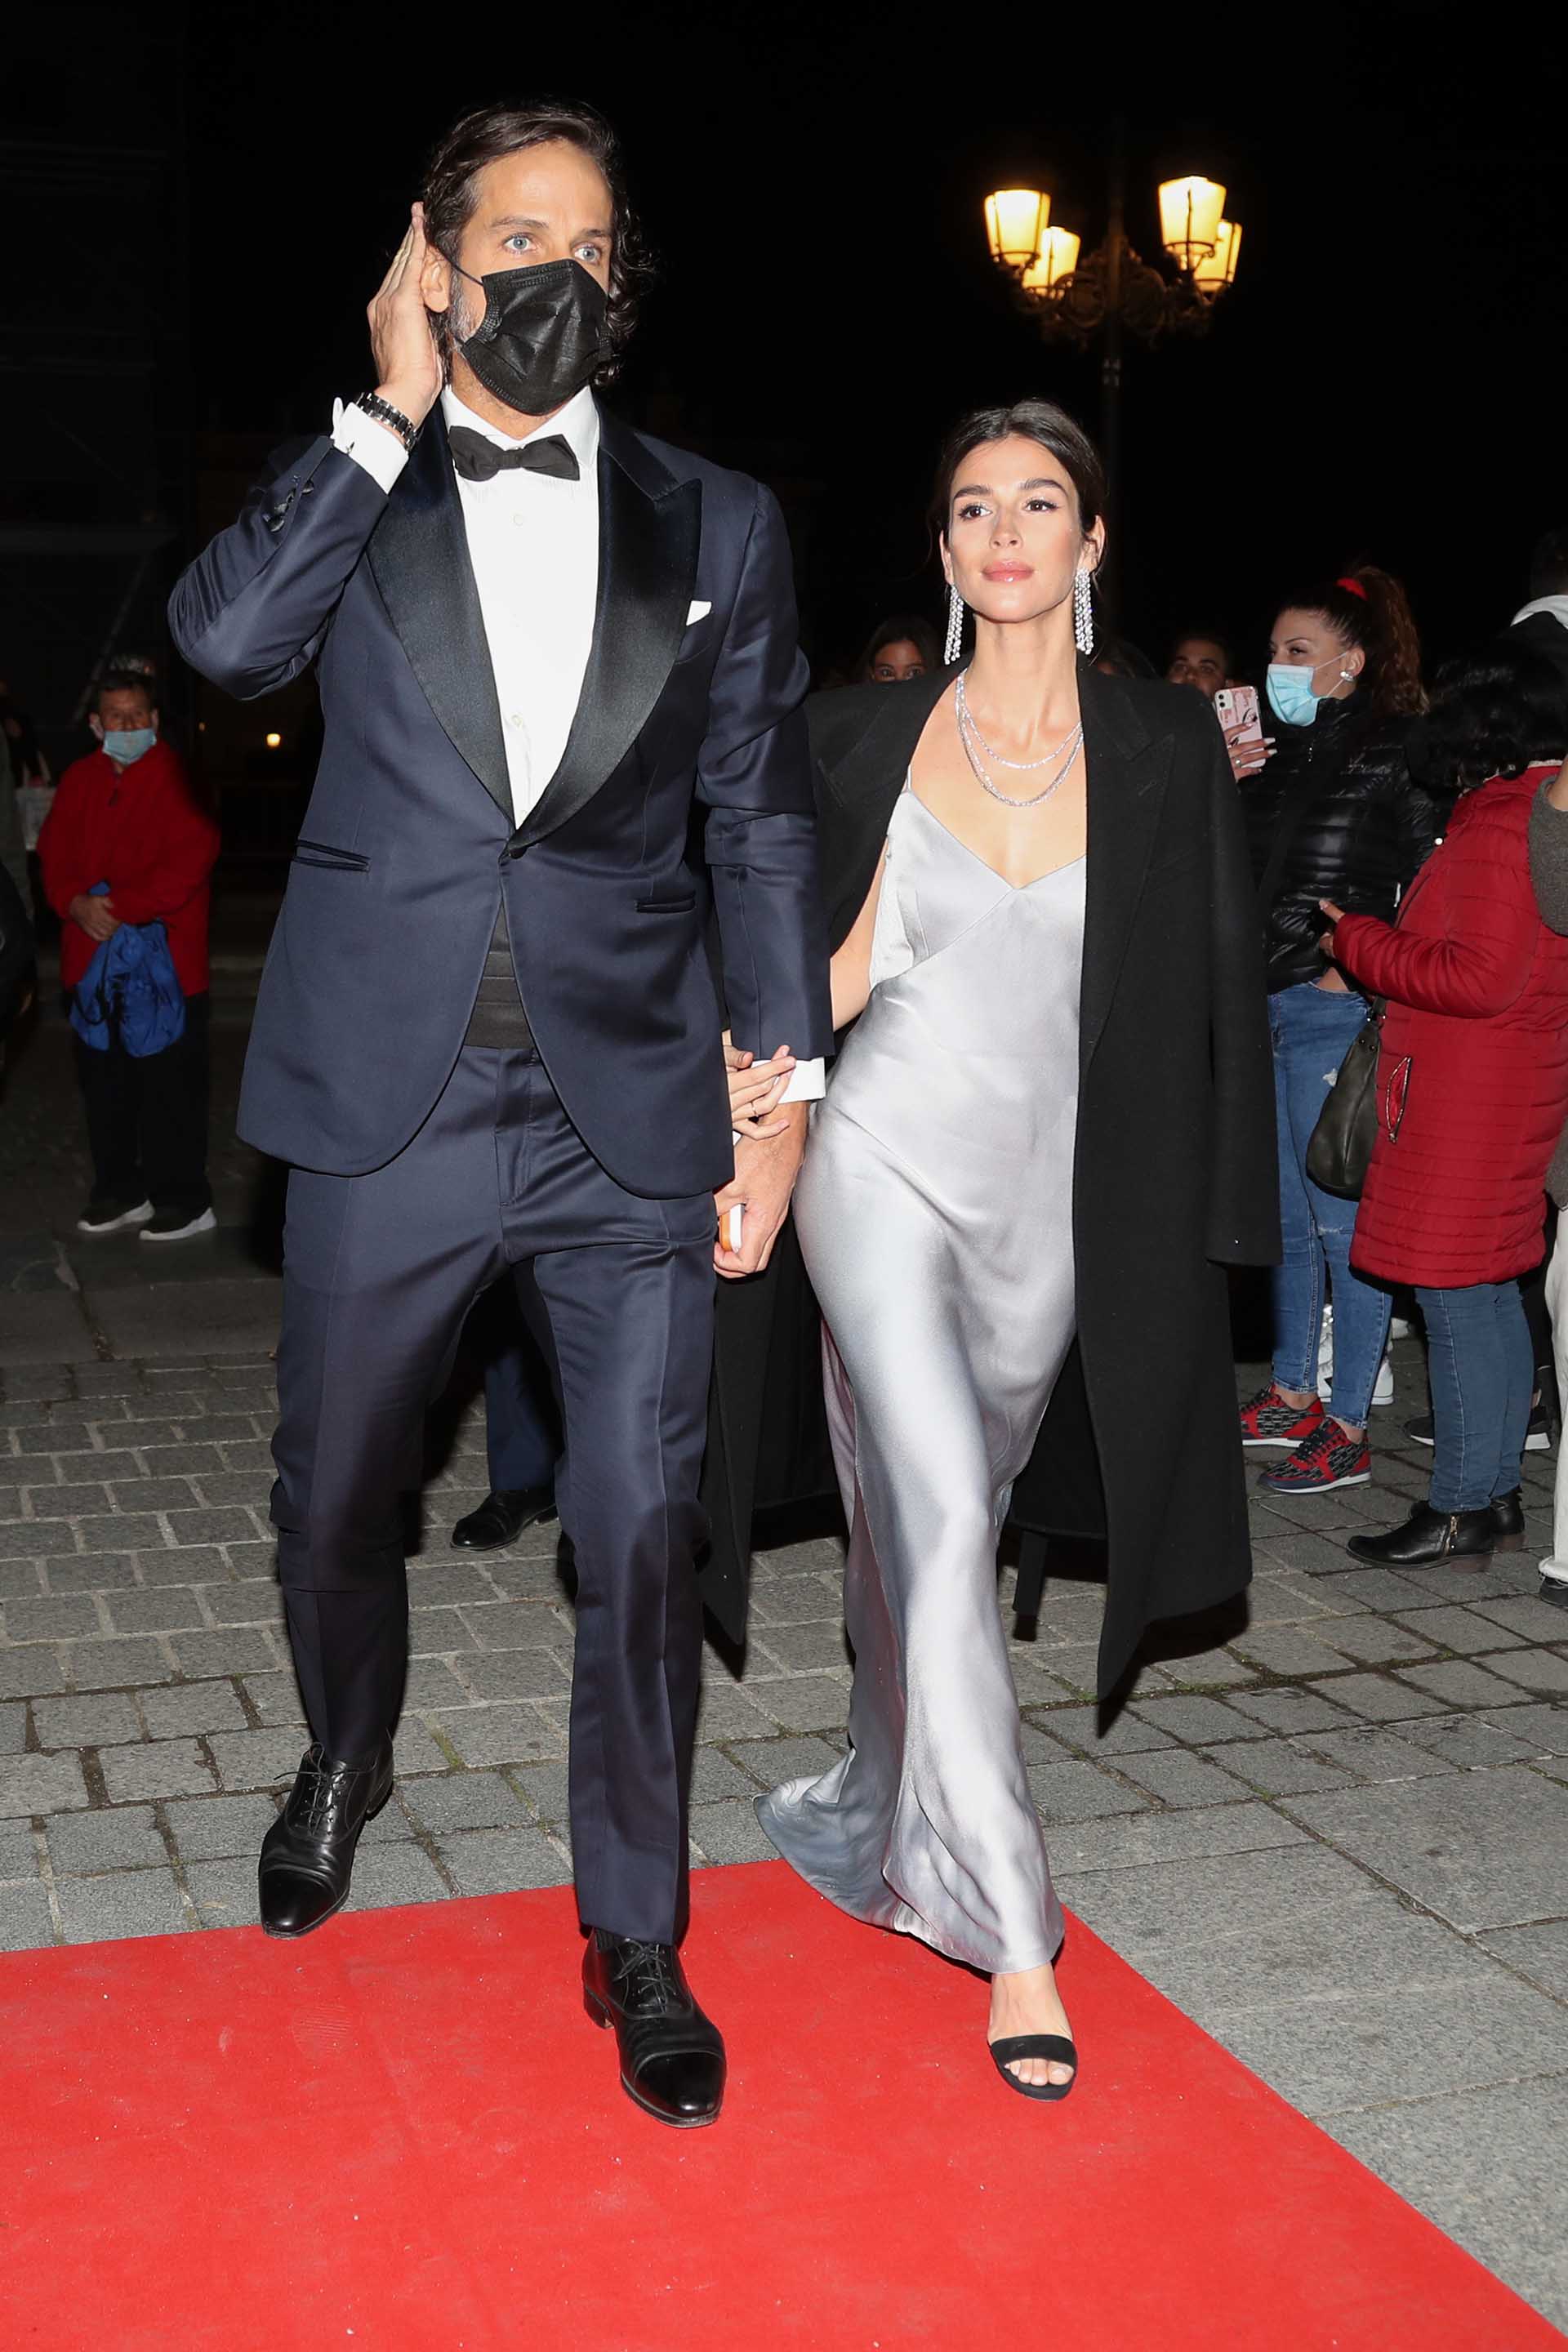 Feliciano Lopez and Sandra Gago arriving to Vanity Fair awards 2021 in Madrid on Wednesday, 30 November 2021.